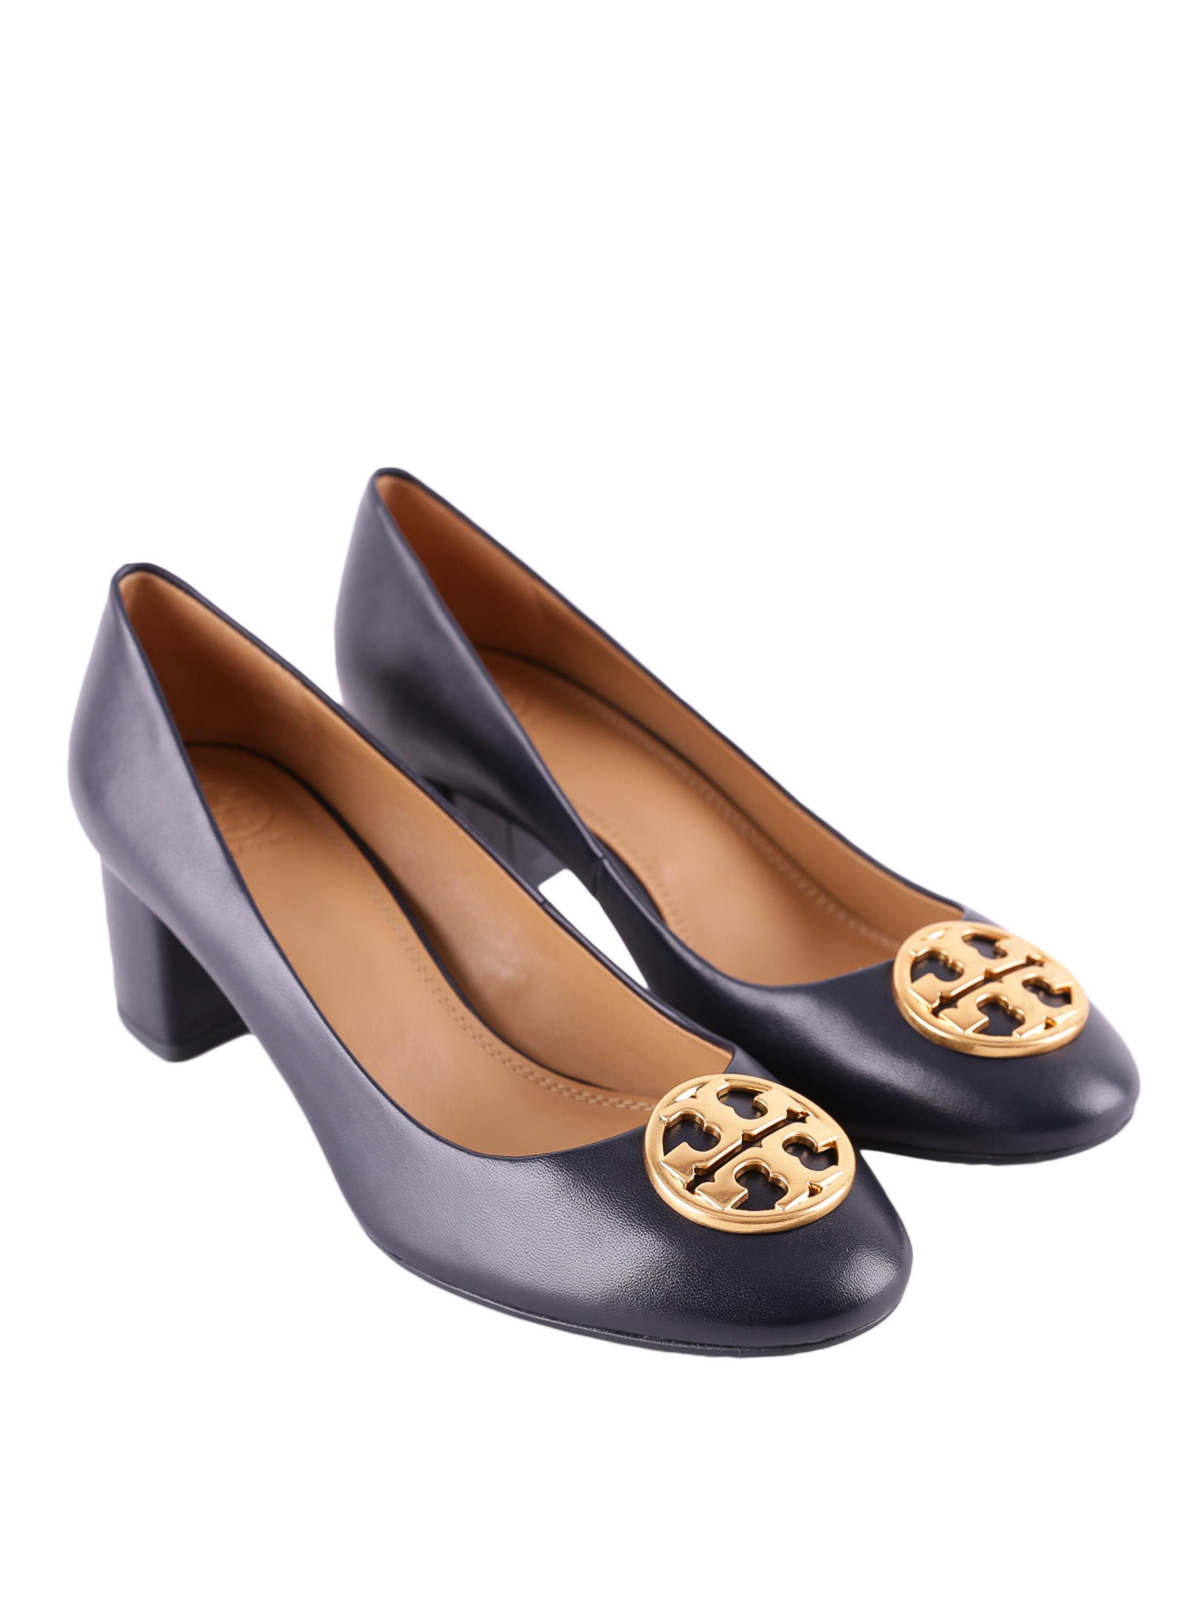 Court shoes Tory Burch - Chelsea navy nappa pumps - 45900430 